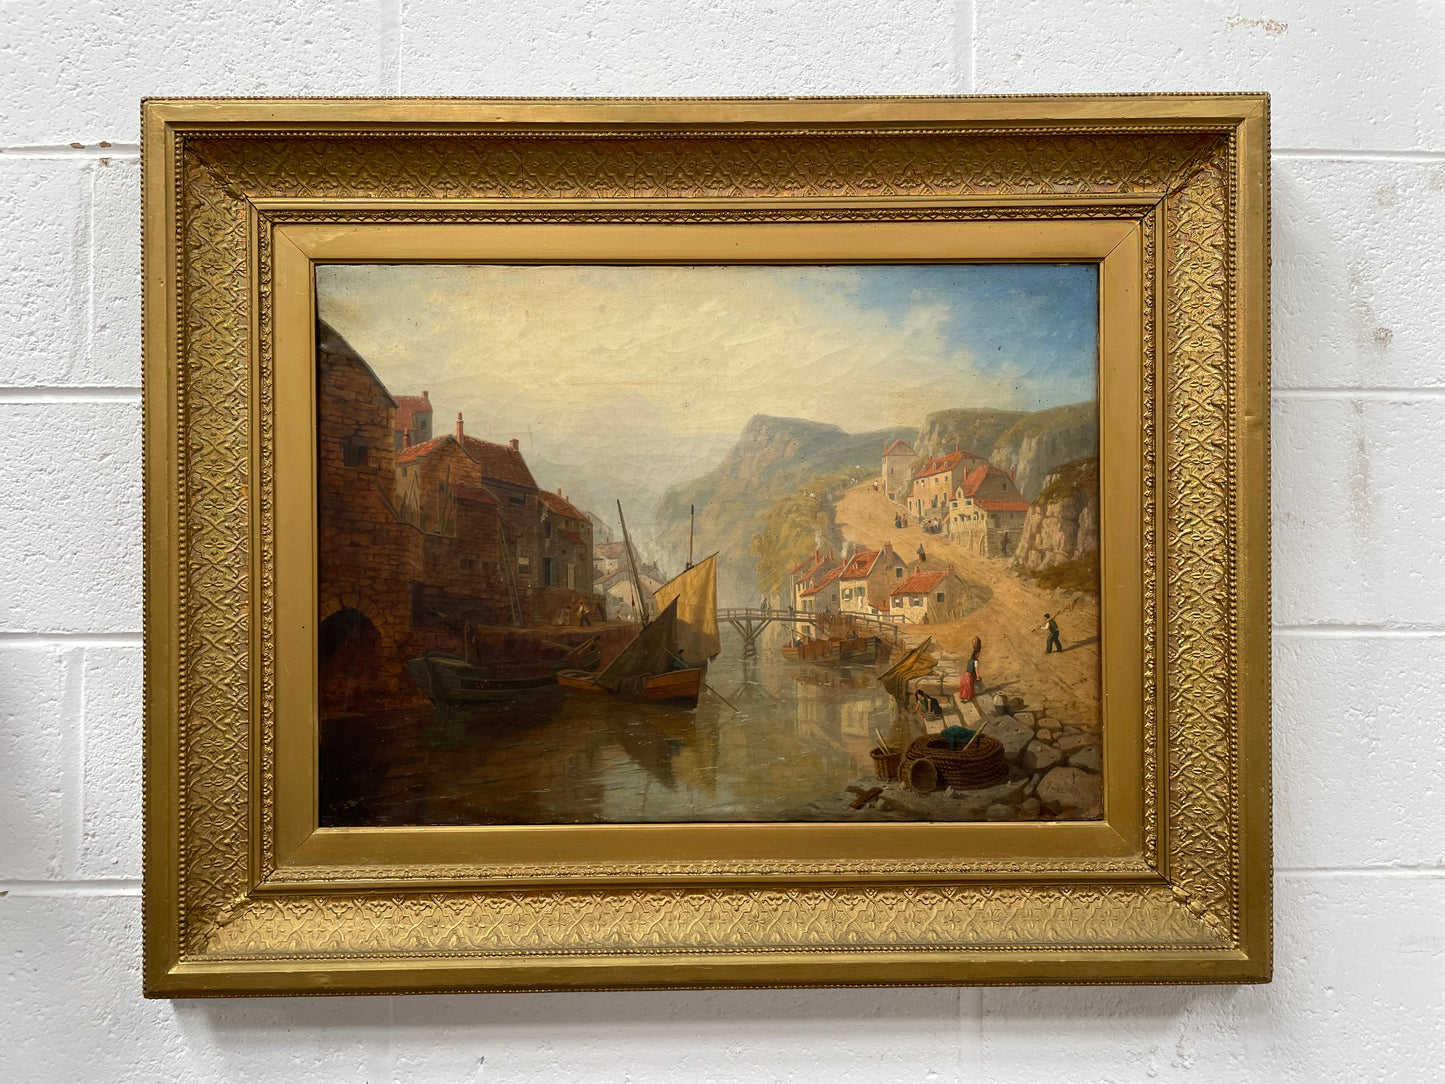 Beautifully Framed Antique Oil Painting on Canvas By Thomas Pyne